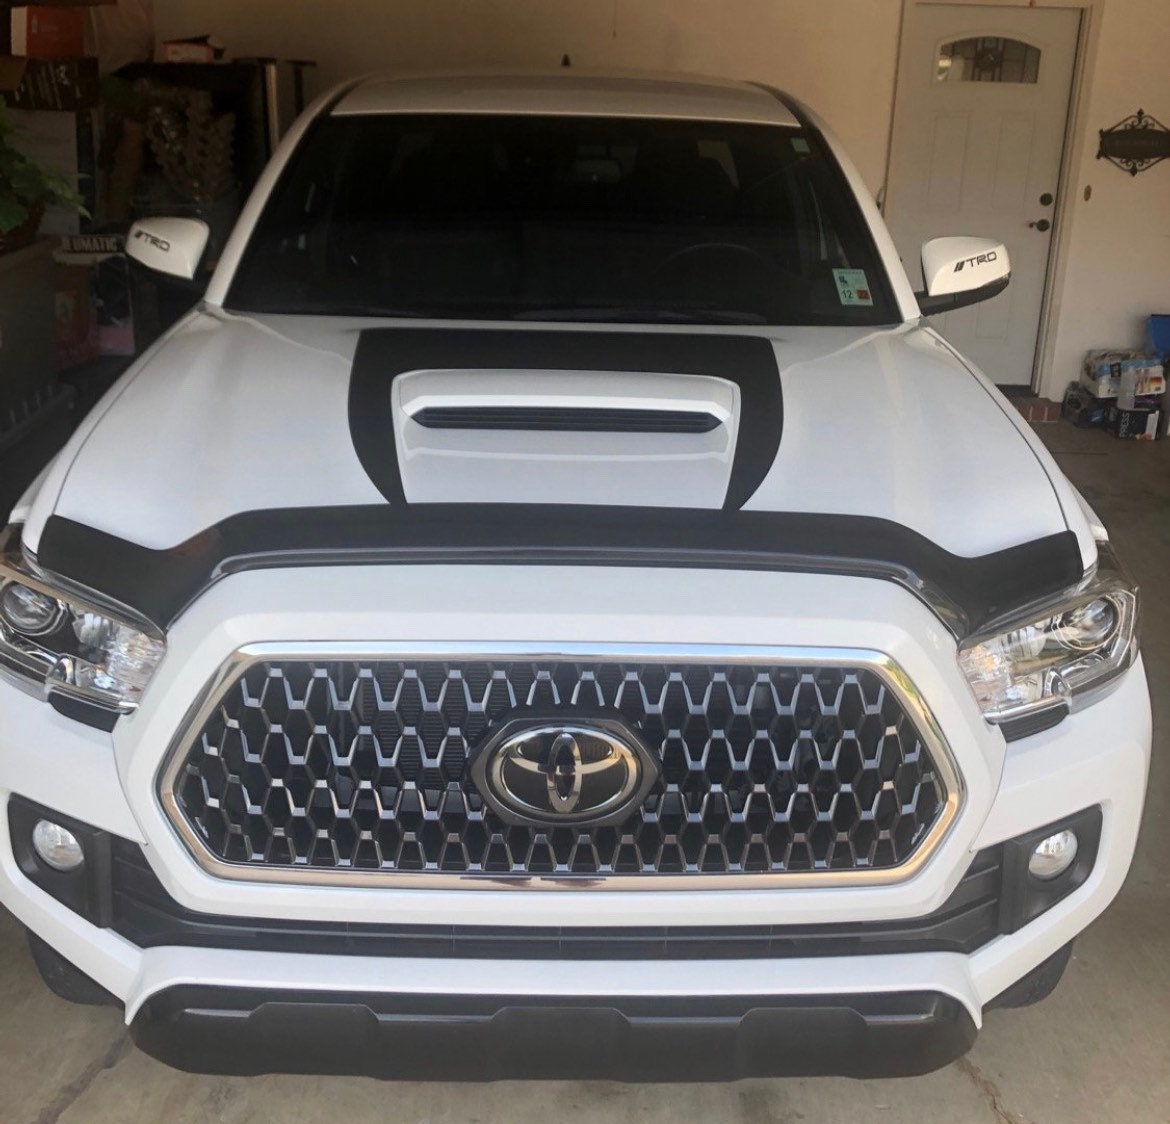 MATTE BLACK - 2016 to 2021 Tacoma Front Hood Scoop Graphic Decal Inlay